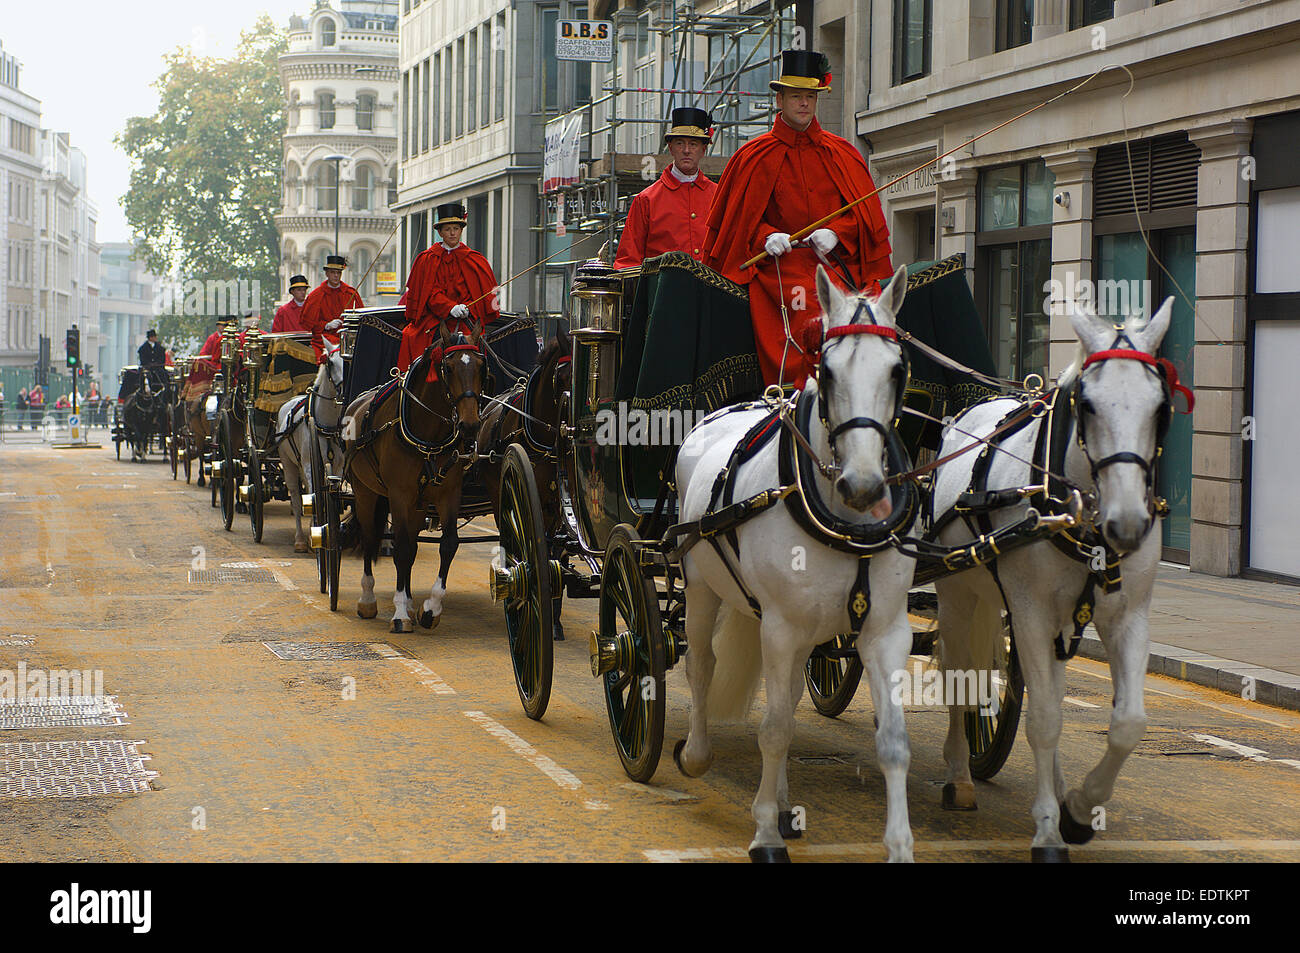 The carriages which were to be used in the Lord Mayor's Show lining up in the correct order before the start. Stock Photo